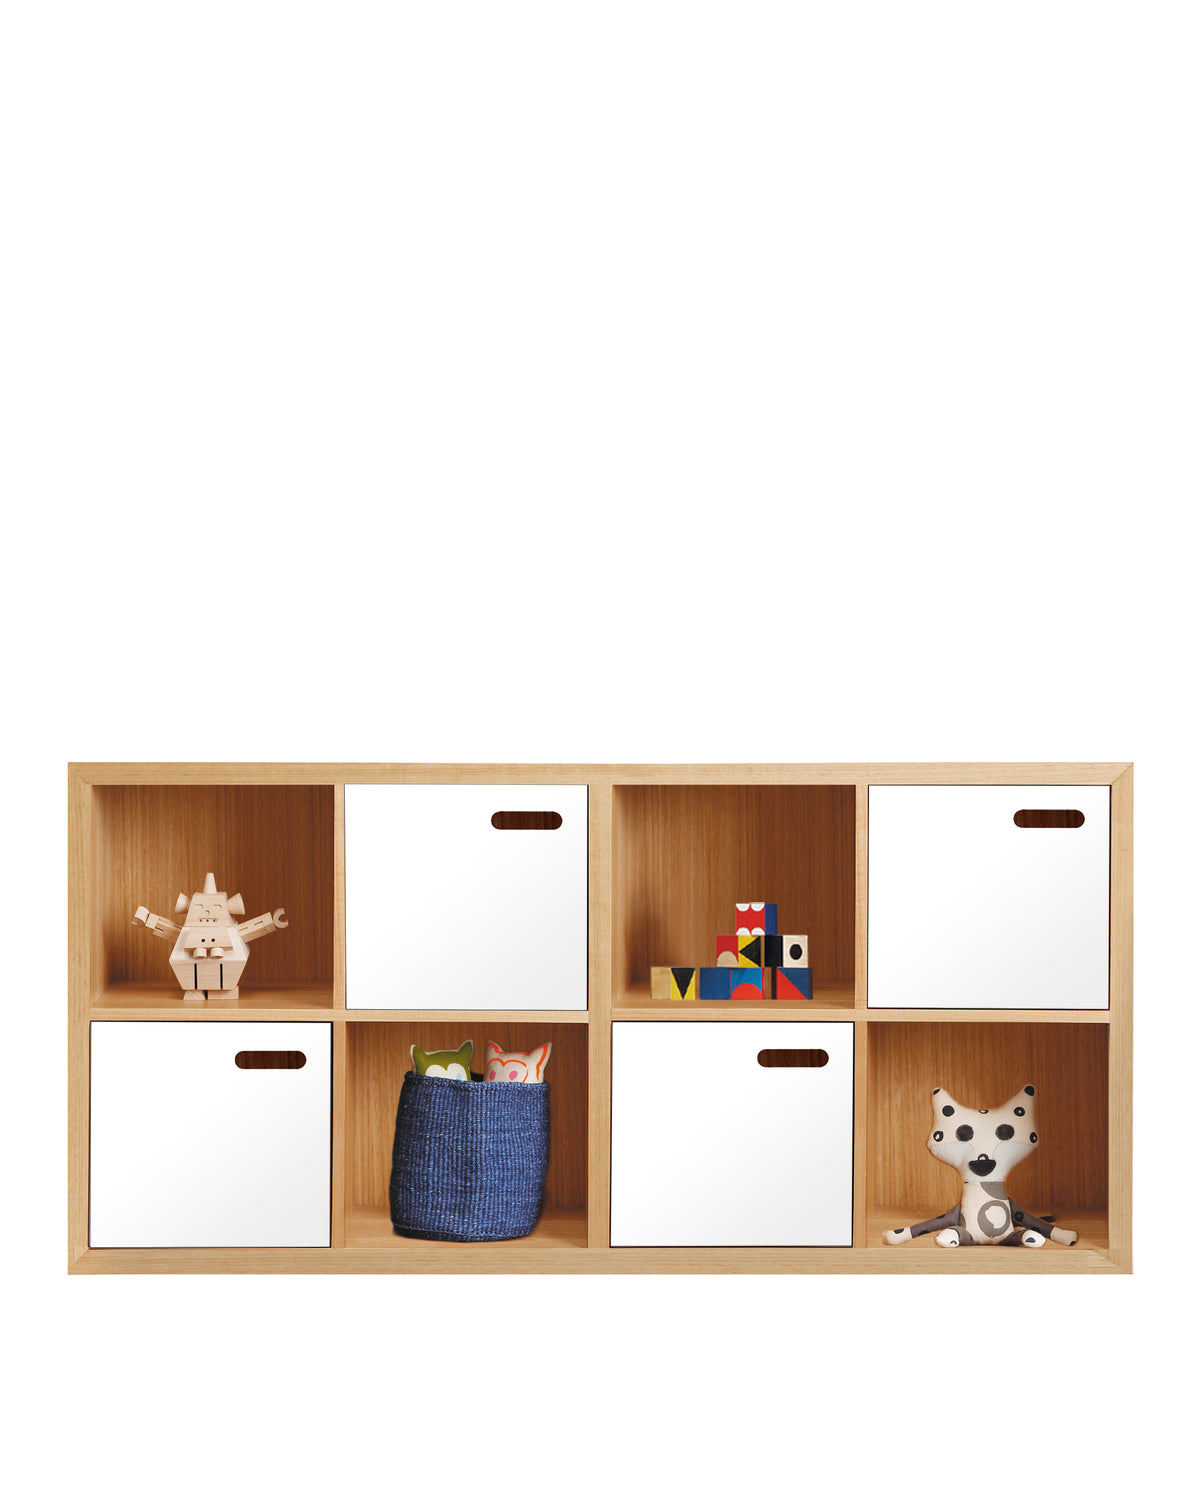 Scoop Bookcase is both a bookcase and toy box in one. With open cavities to display books and treasures and interchangeable boxes to stash away toys. Four boxes feature a curved cut-out handle, and the frame conceals intricate mitred joinery.  Choose frame + choose box colour = your bookcase